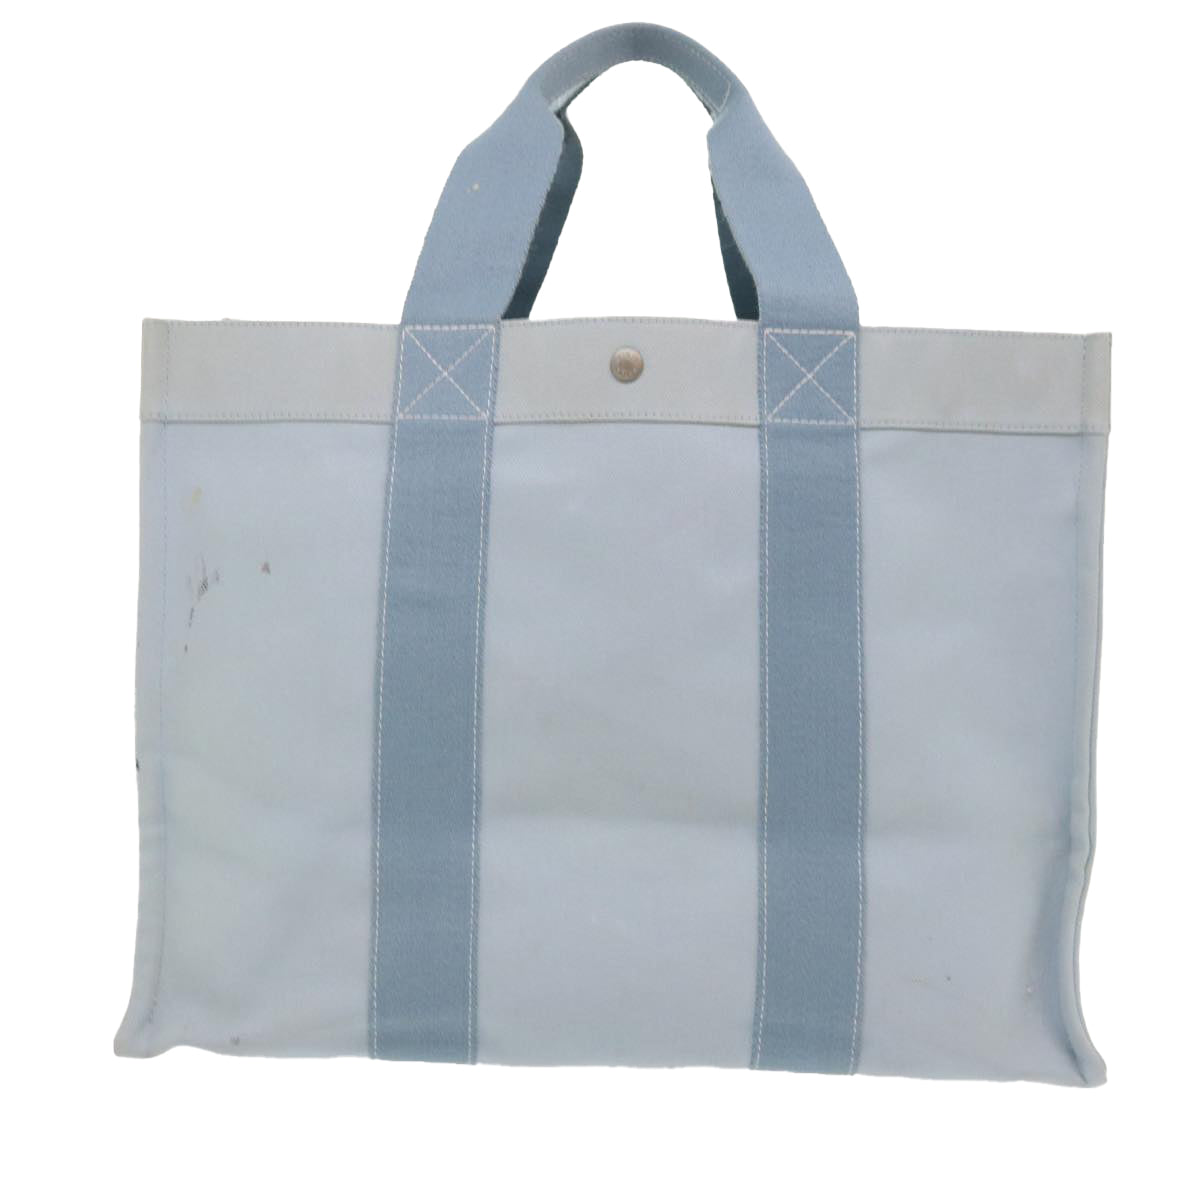 HERMES Coquillage GM Tote Bag Canvas Light Blue Auth 46966 - 0